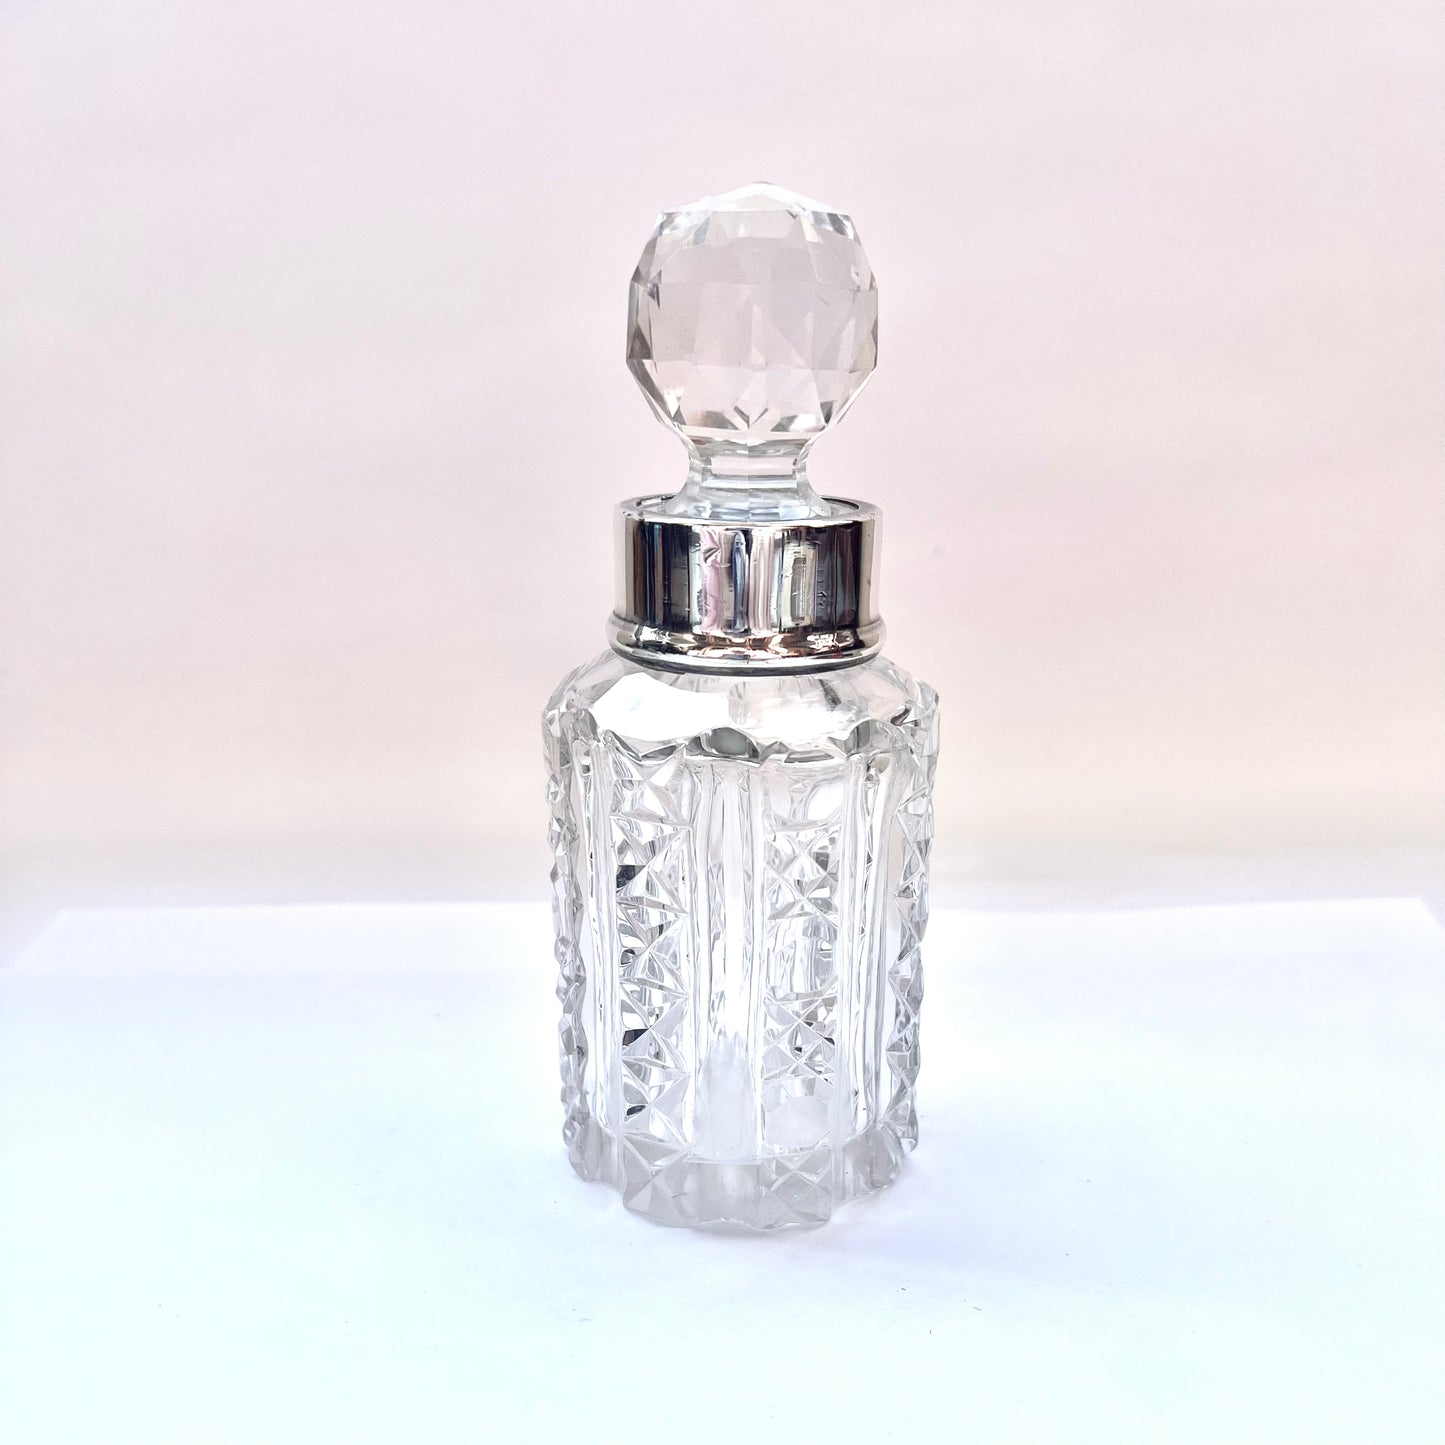 Antique Victorian cut glass and sterling silver toiletry/scent bottle, George Betjemann & Sons, London, 1896